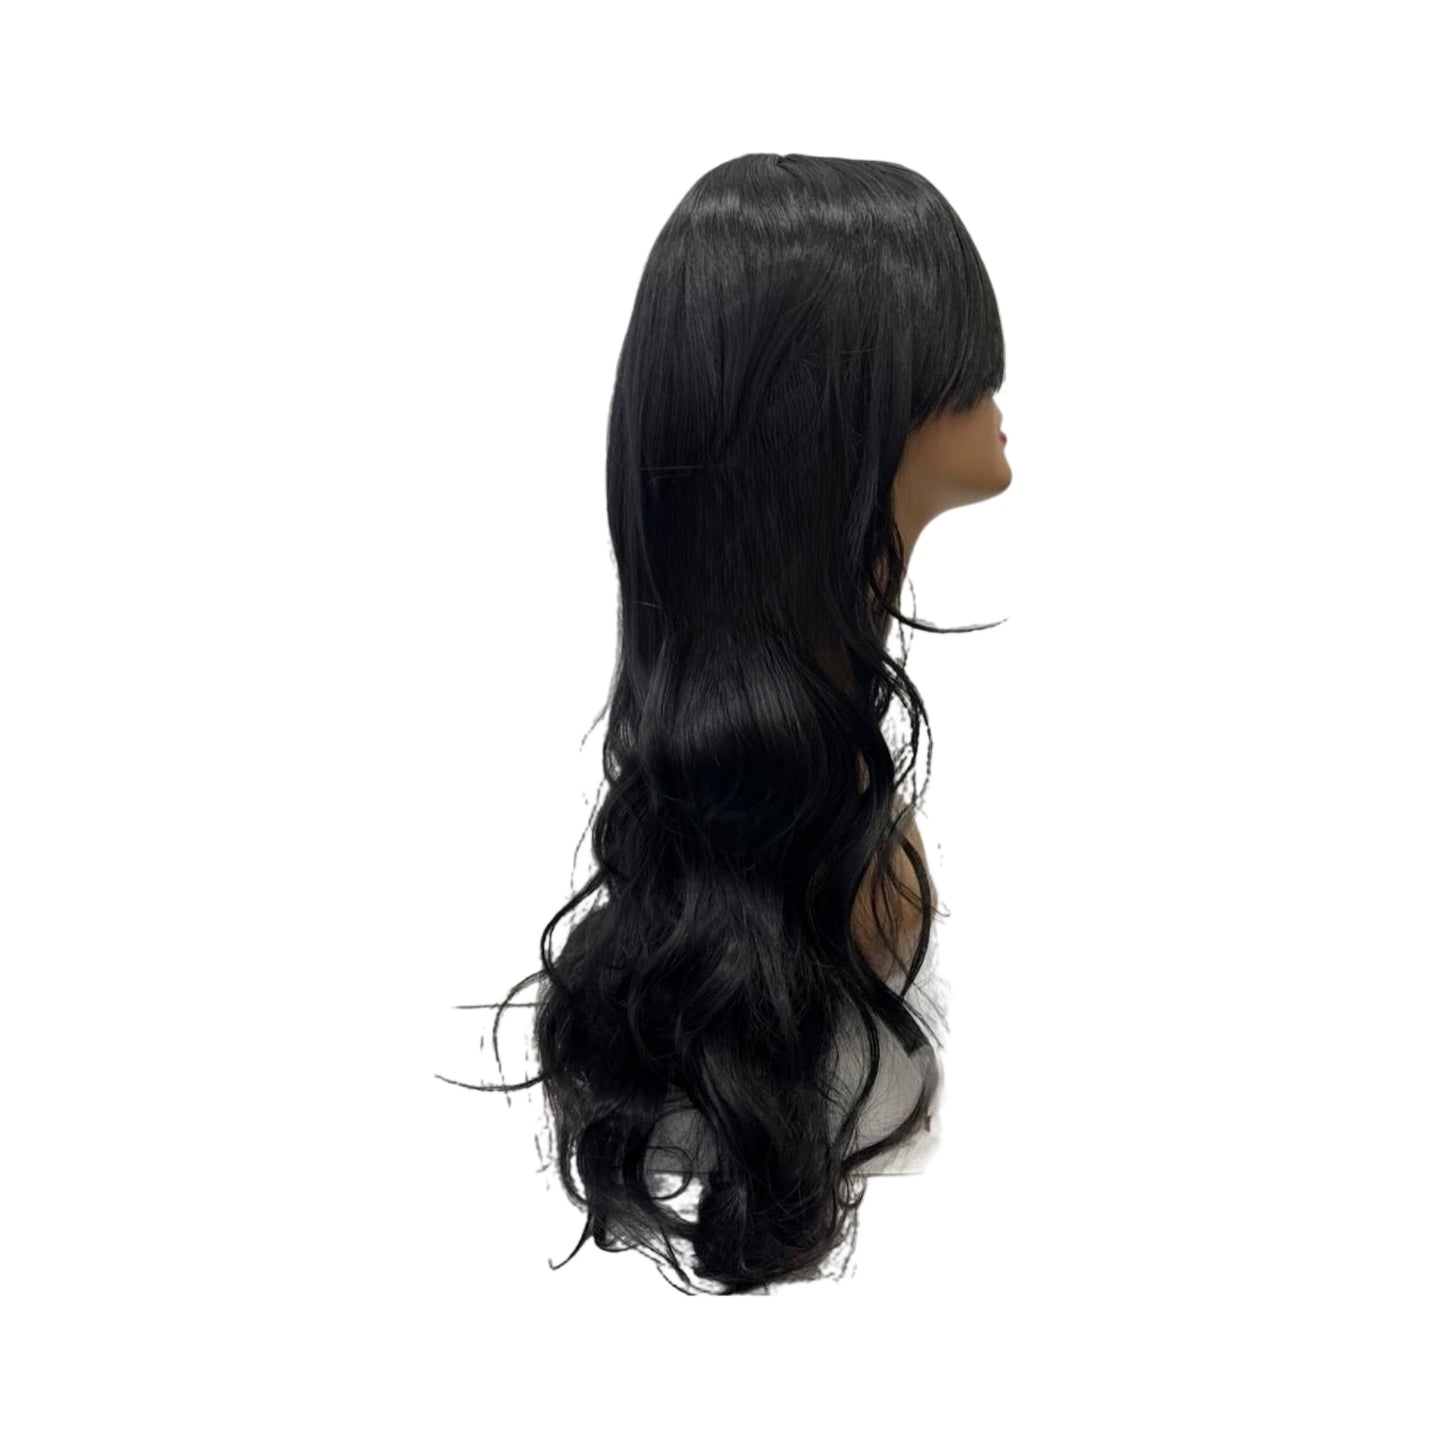 Long Synthetic Wig (#1) | A-004 | 28 inches | Durable | Breathable Cap